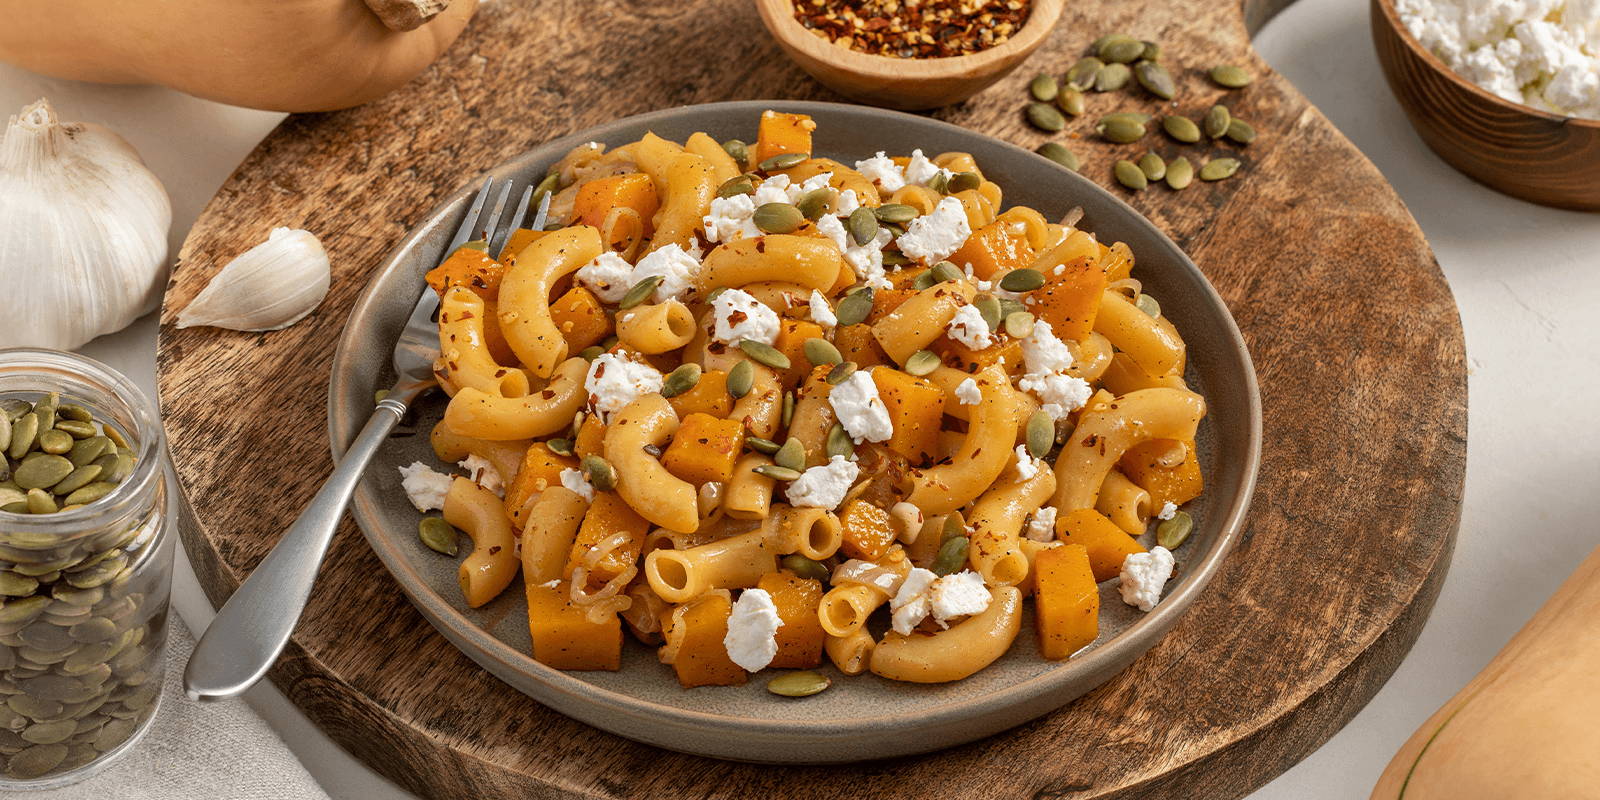 A gray plateful of ZENB Elbows Pasta With Butternut Squash & Goat Cheese atop a round wooden board, styled next to its whole ingredients.